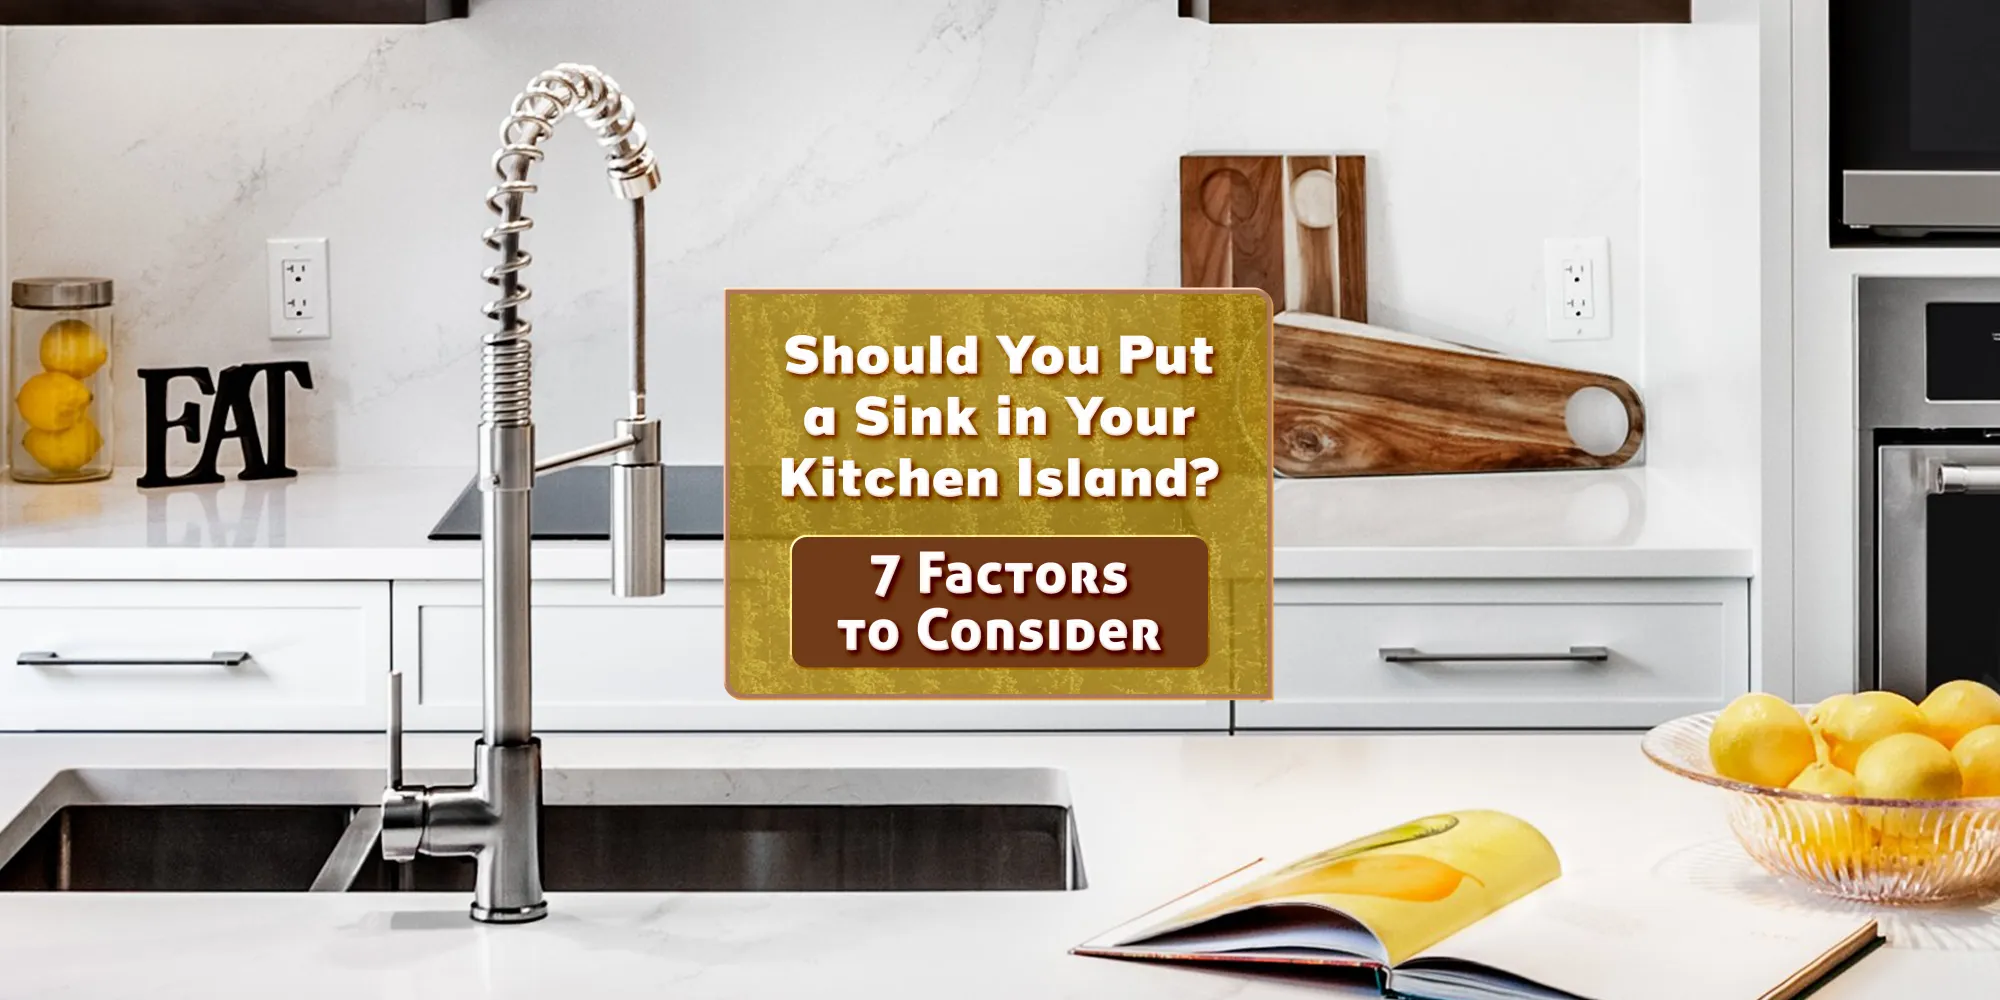 How Much Countertop Space Does Your Kitchen Need? 4 Factors